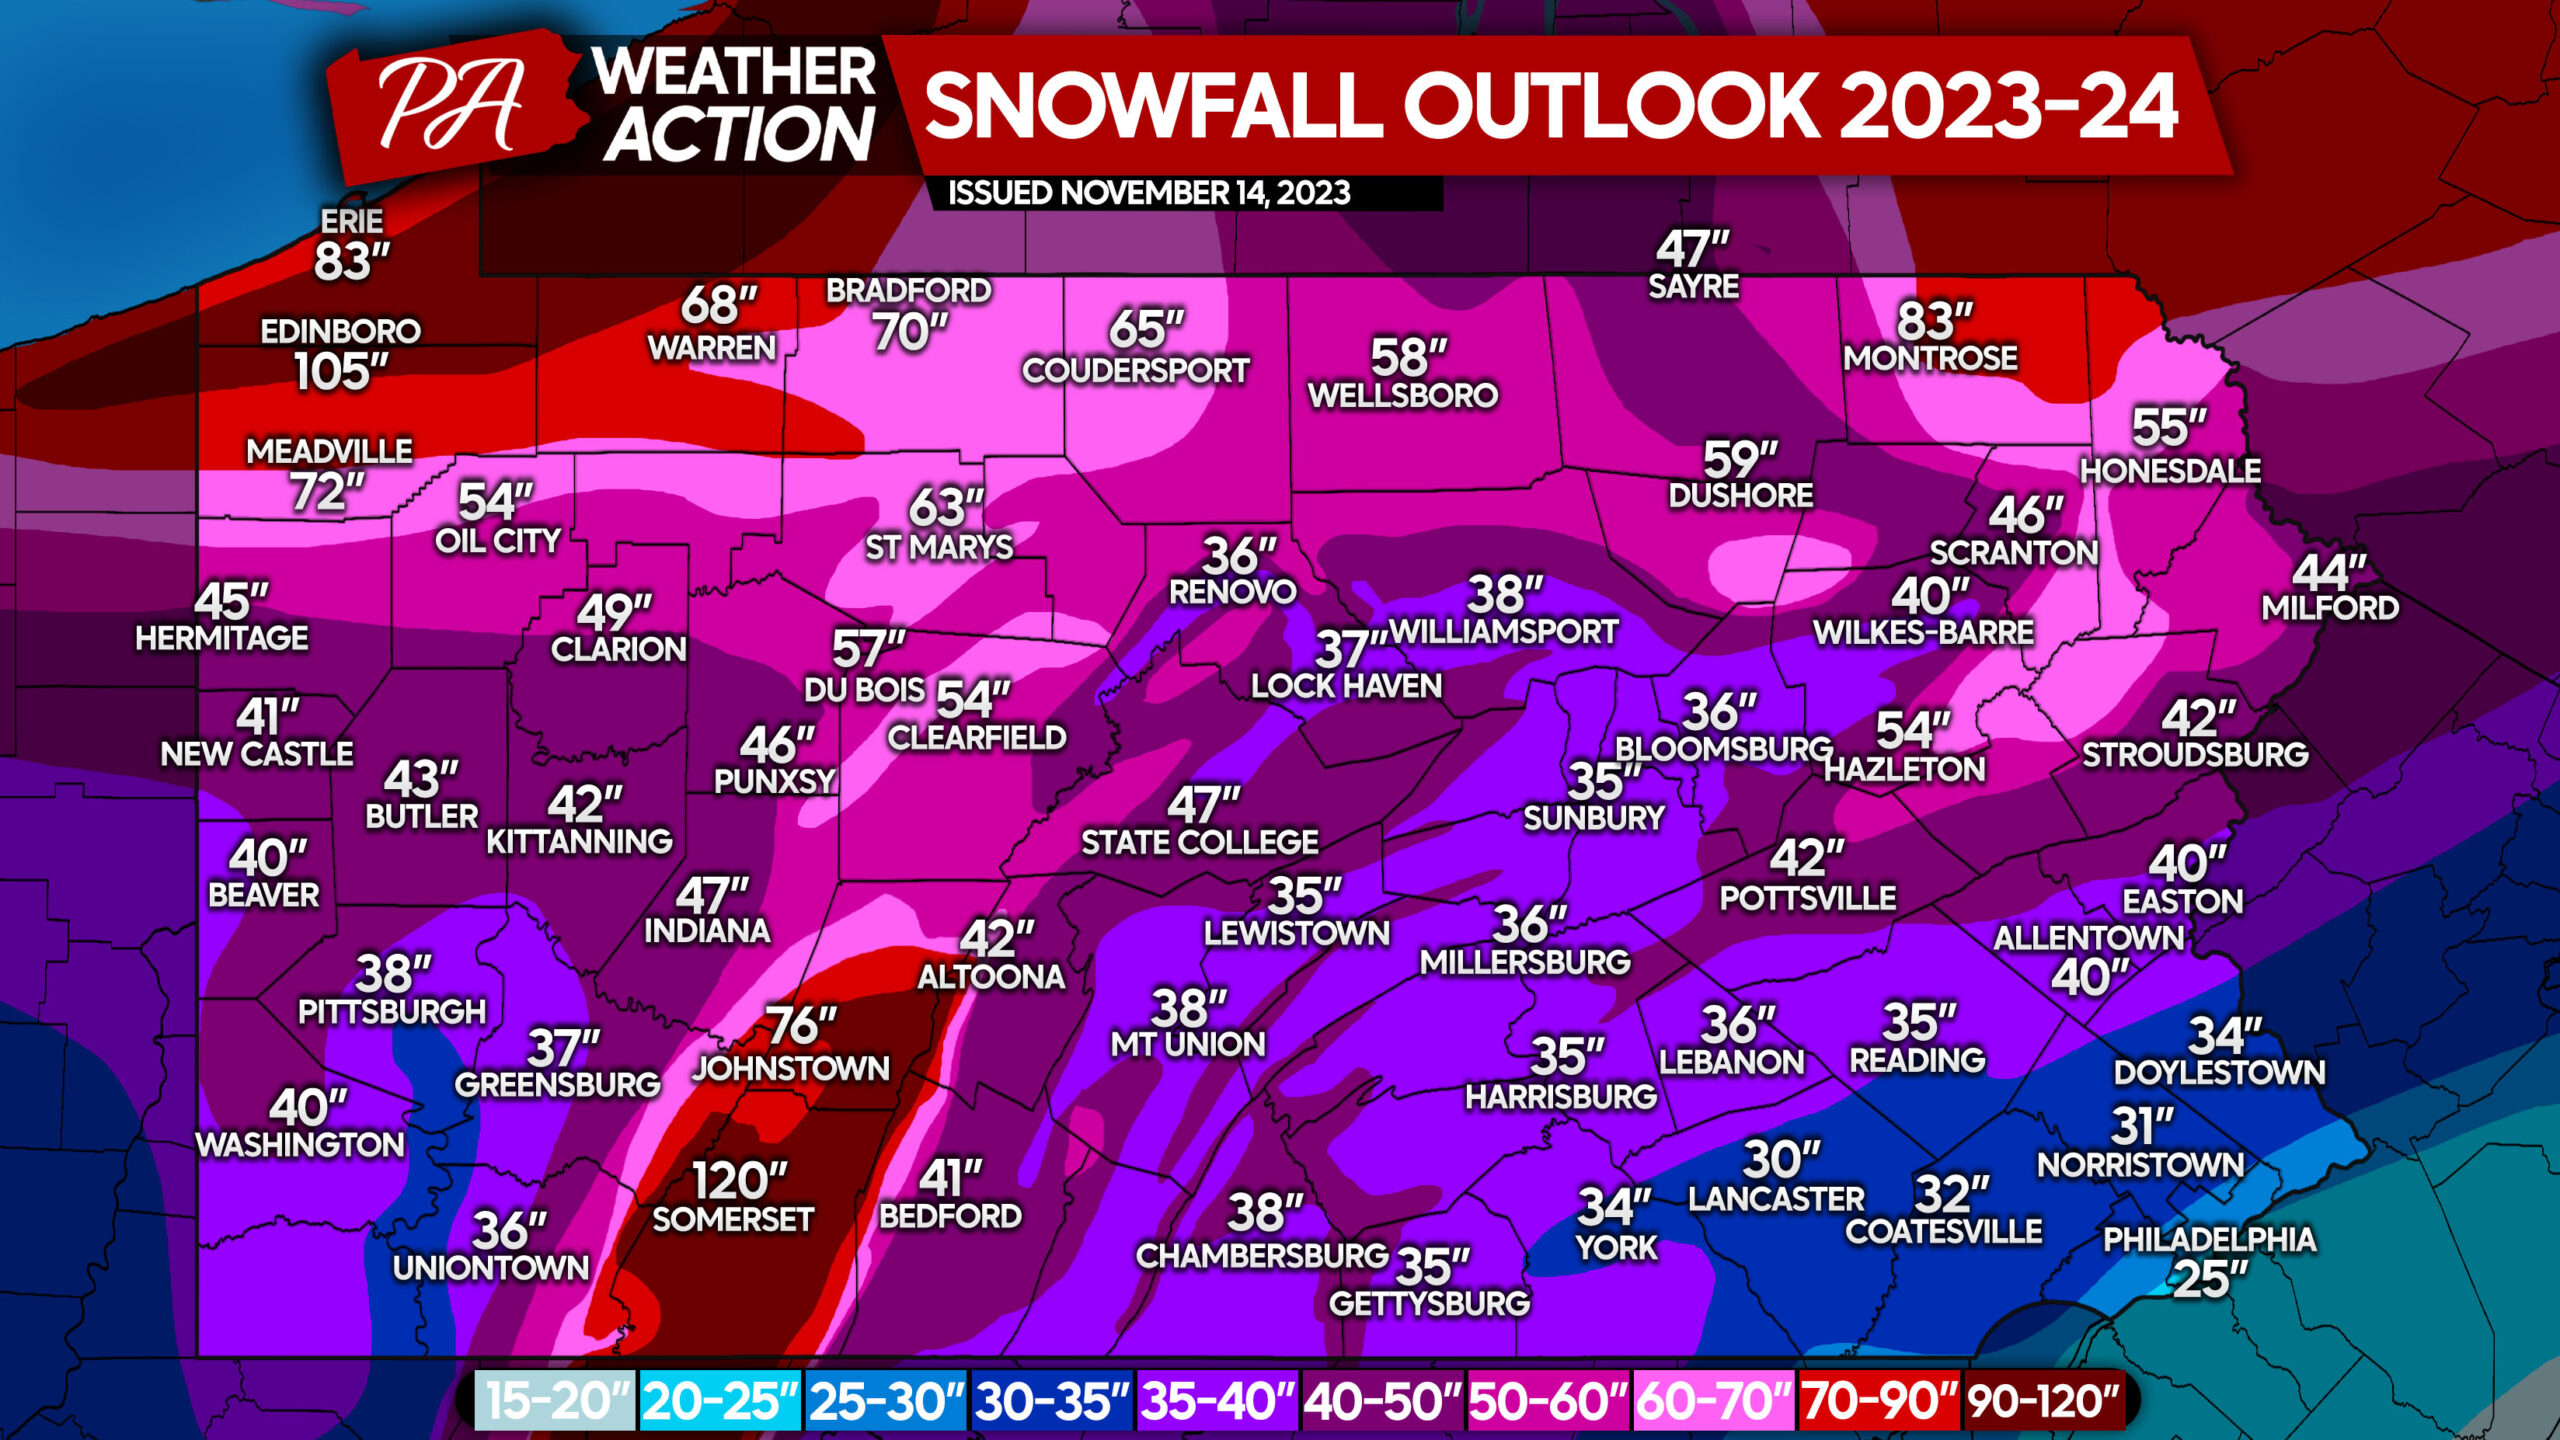 2023 - 2024 Winter Outlook for Pennsylvania: Hope for Snow Lovers in Much of the State